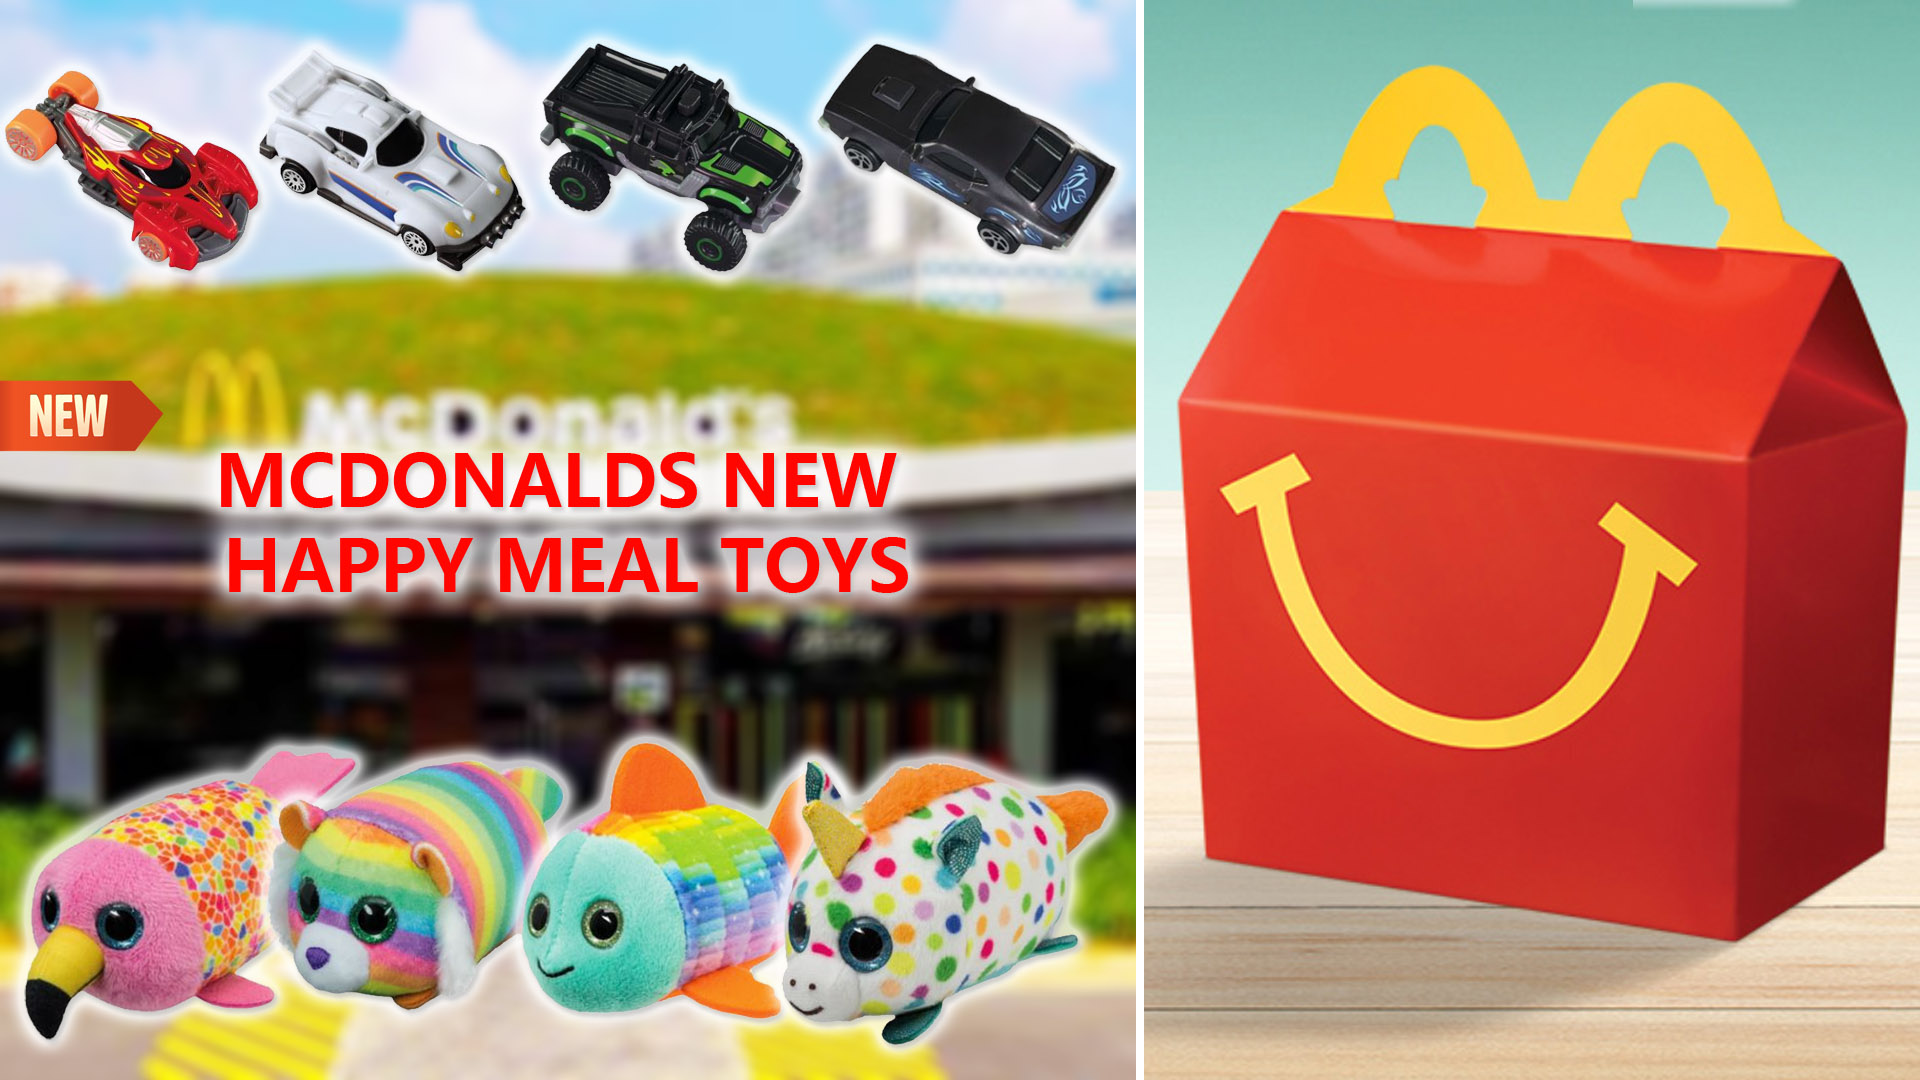 Happy meal toys july 2021